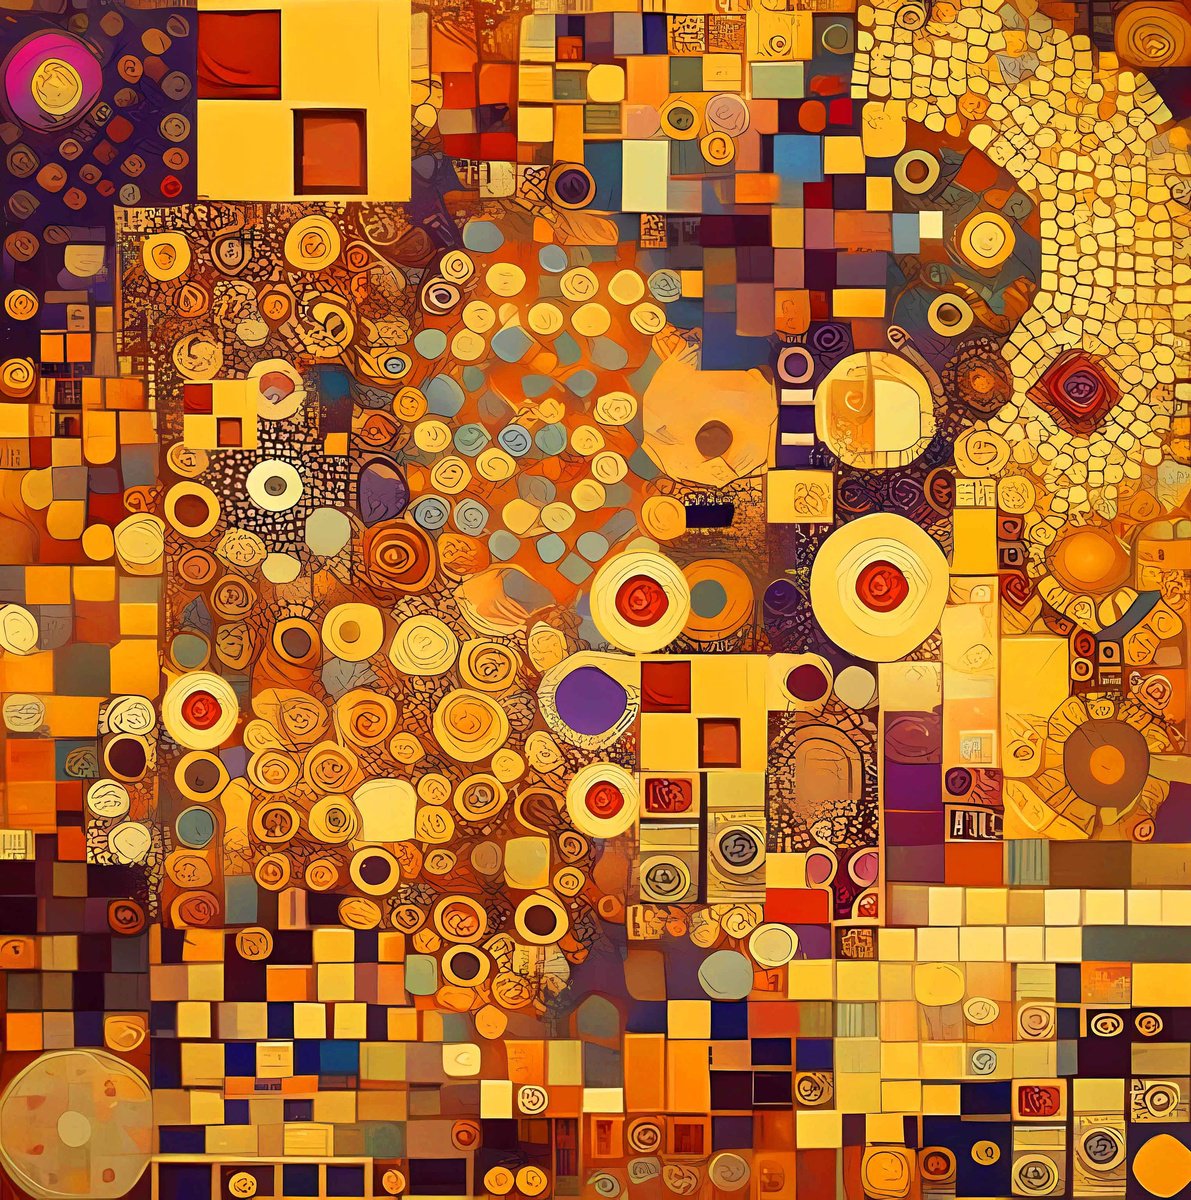 Klimt inspiration abstract. Large positive vibrant colors geometric abstract, bright wall... by BAST